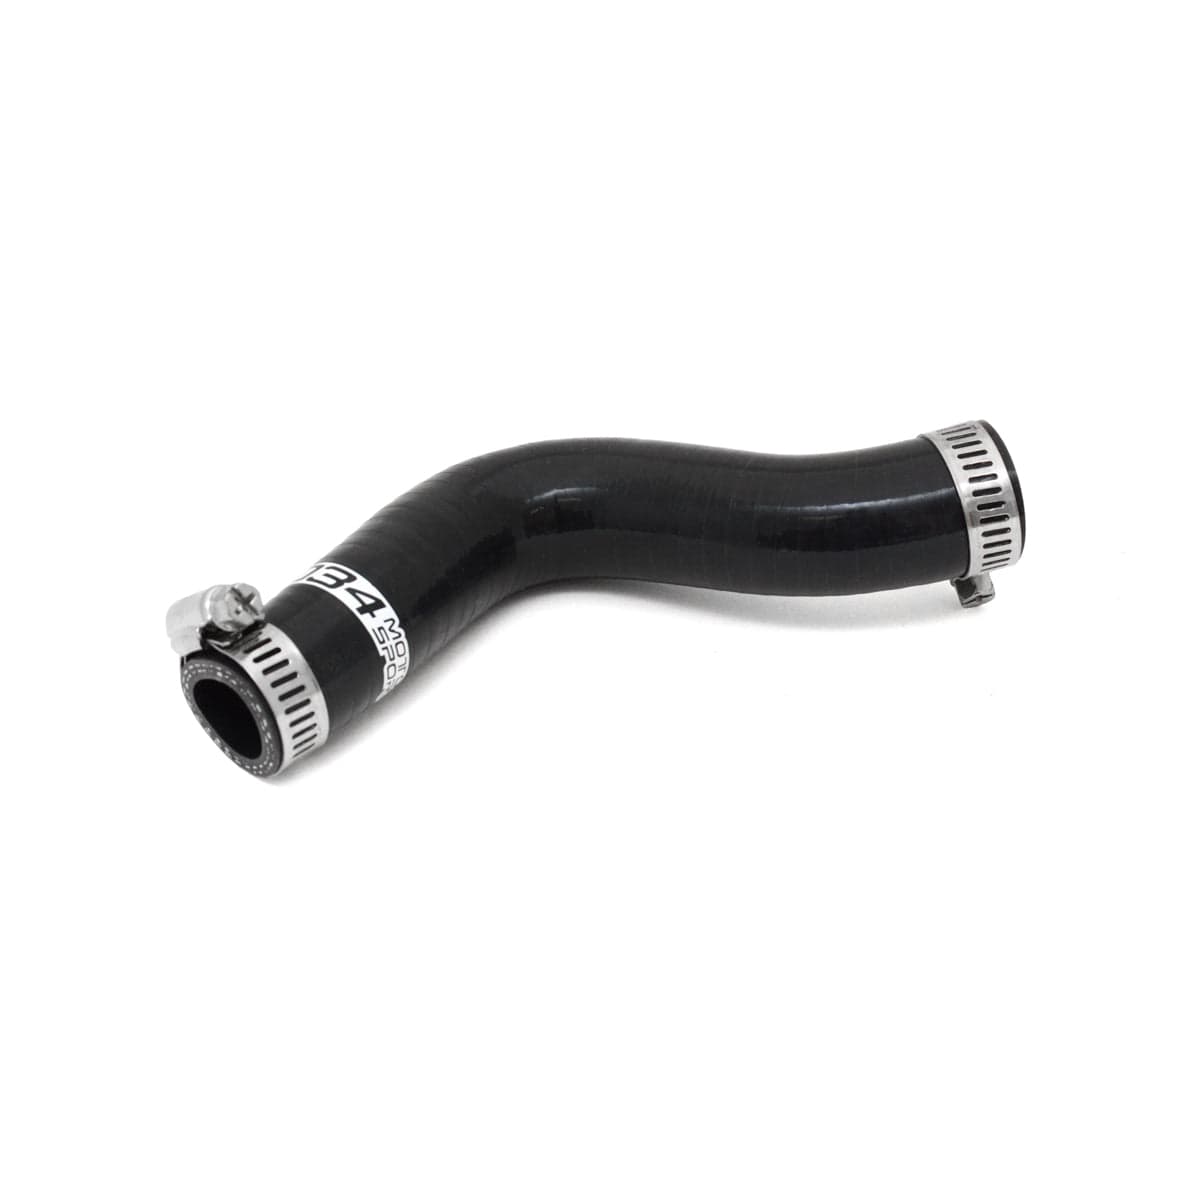 034Motorsport Breather Hose, MkIV Volkswagen & 8N Audi TT 1.8T, PRV Pipe to Turbo Inlet, Silicone, Replaces 06A 103 221 BR - ML Performance